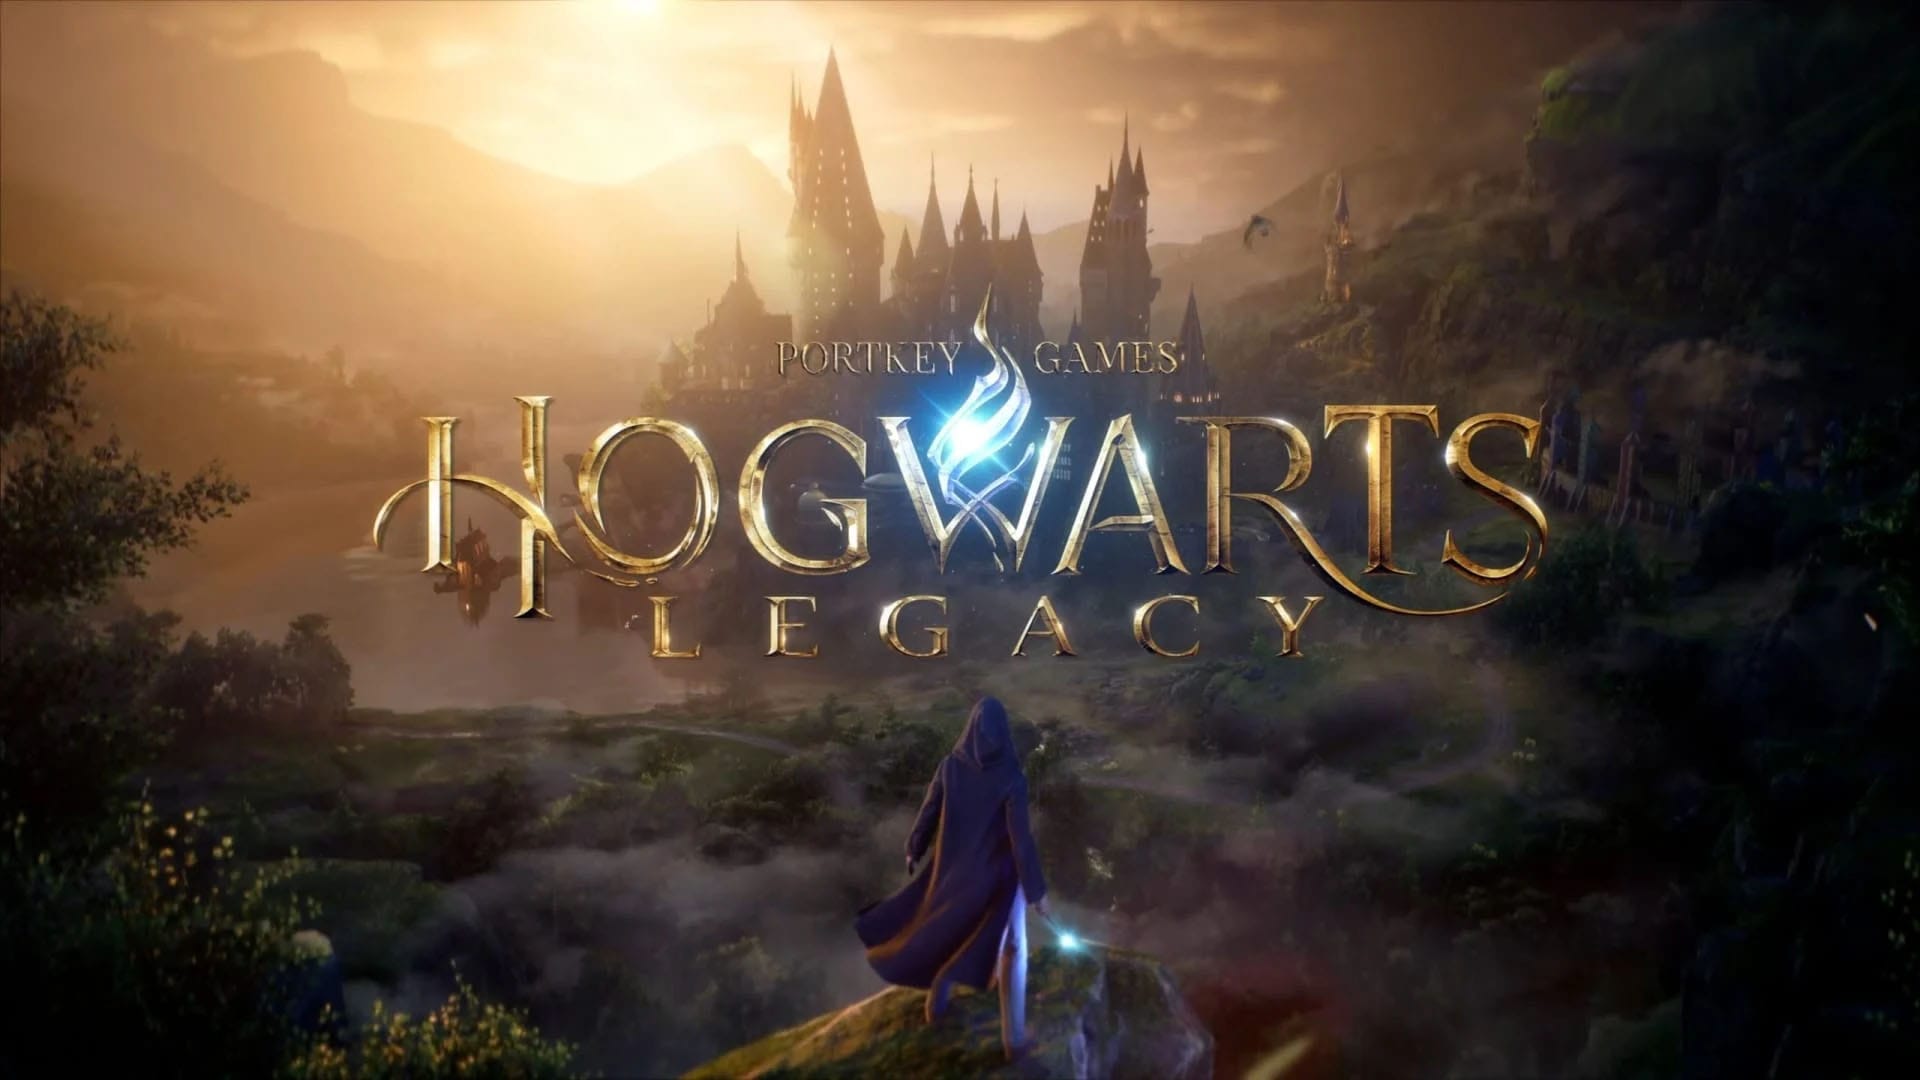 Hogwarts Legacy Music Released in Two Soundtrack Albums